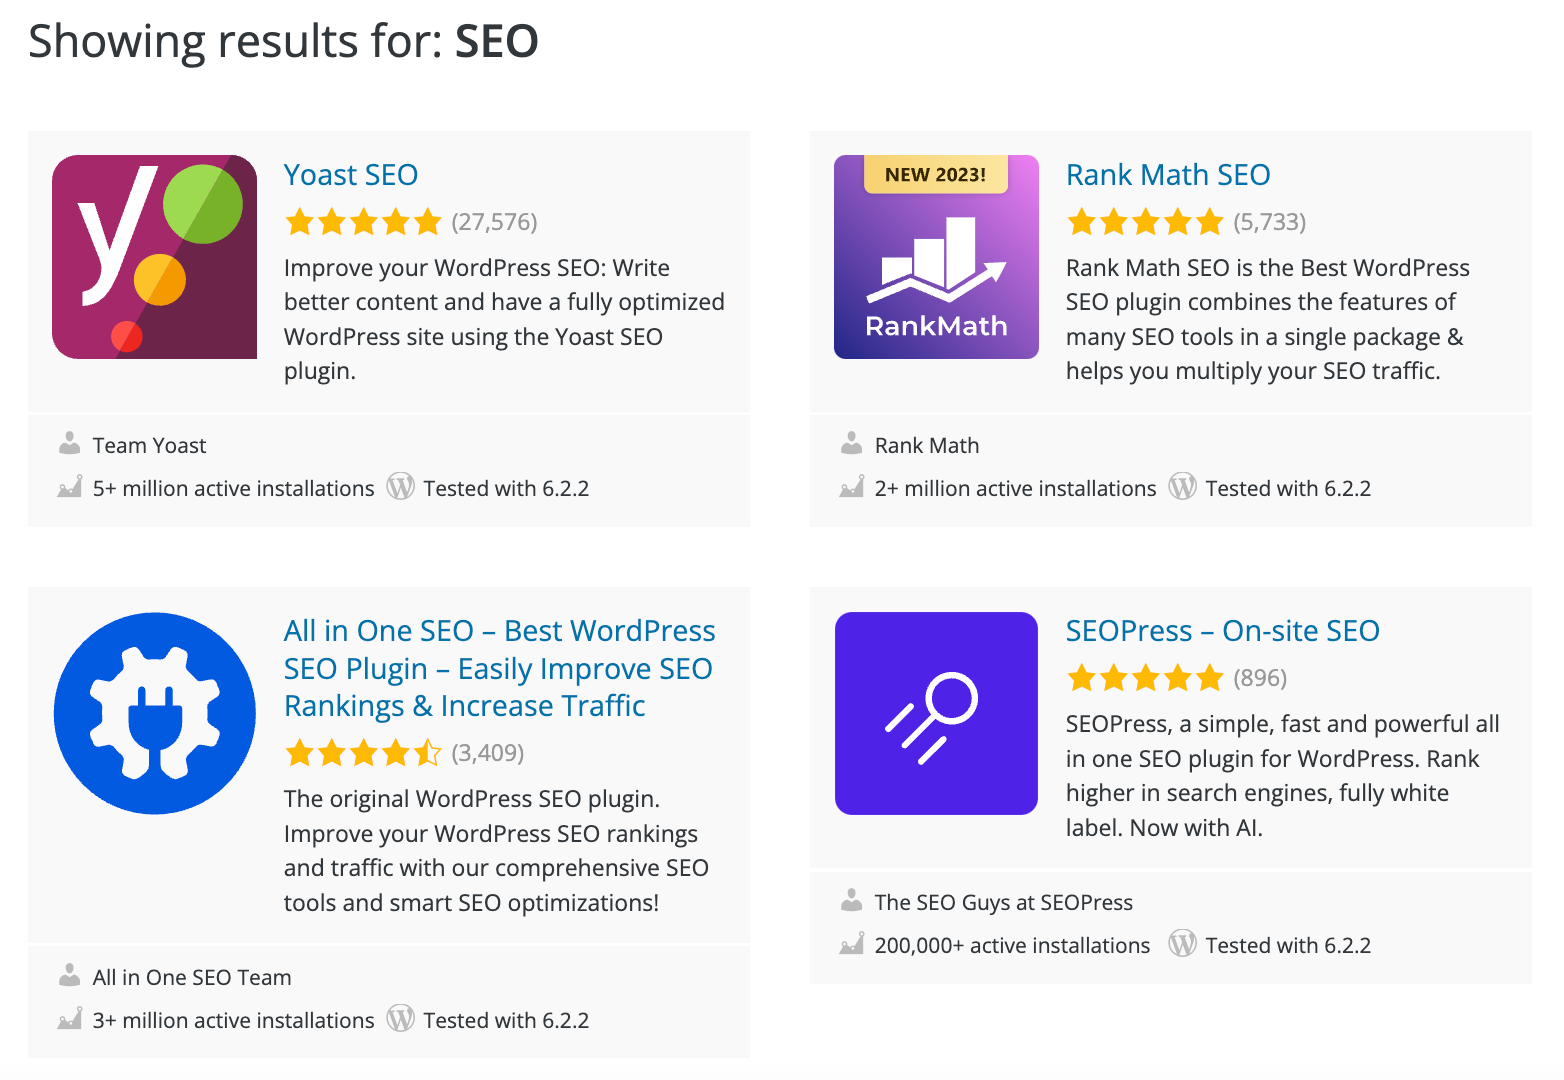 There are hundreds of SEO plugins available for WordPress.